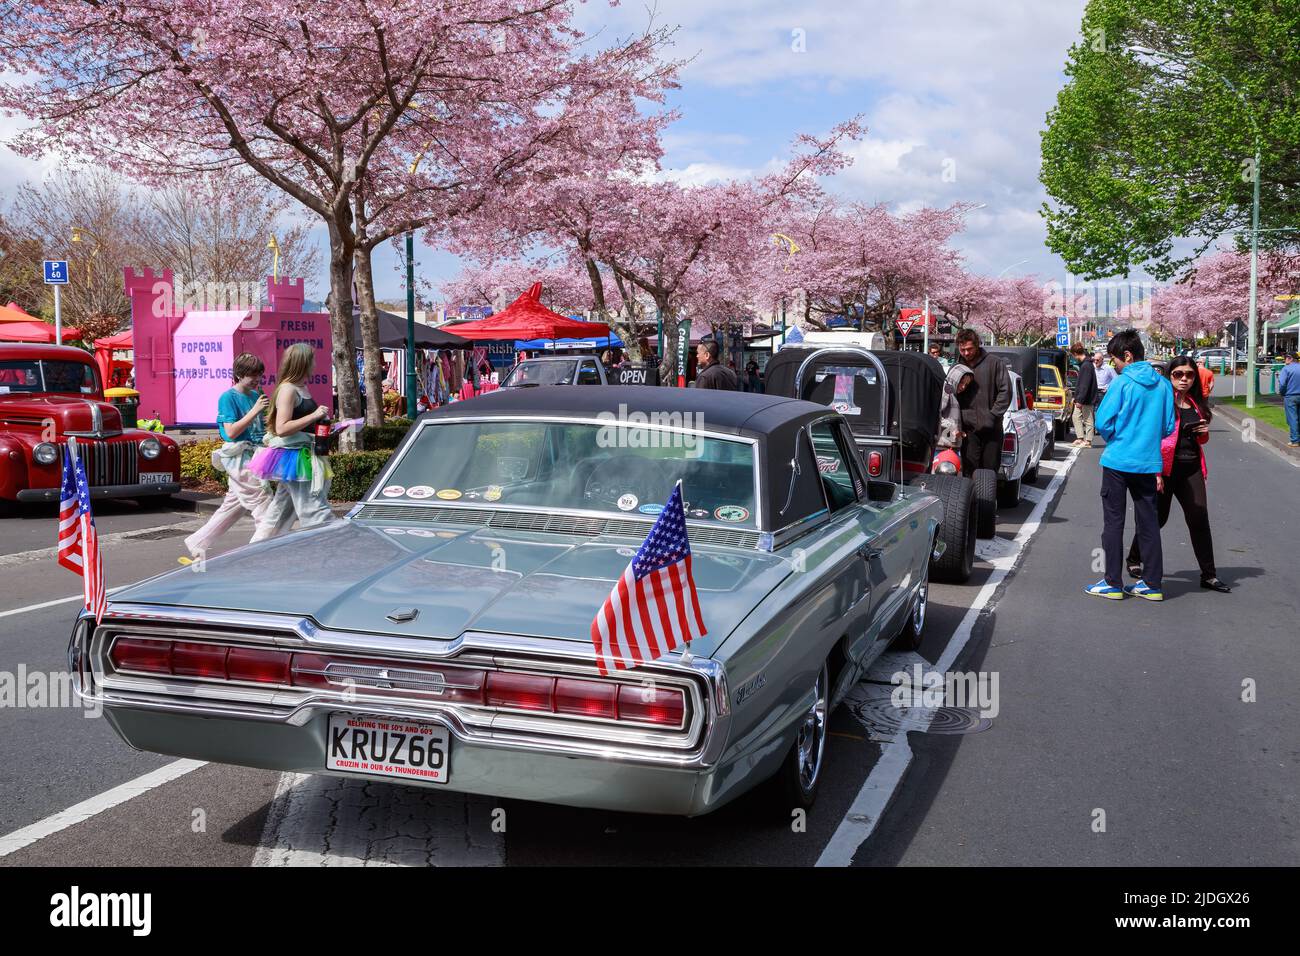 A 1966 Ford Thunderbird with American flags flying from the rear at a classic car festival. Tauranga, New Zealand Stock Photo